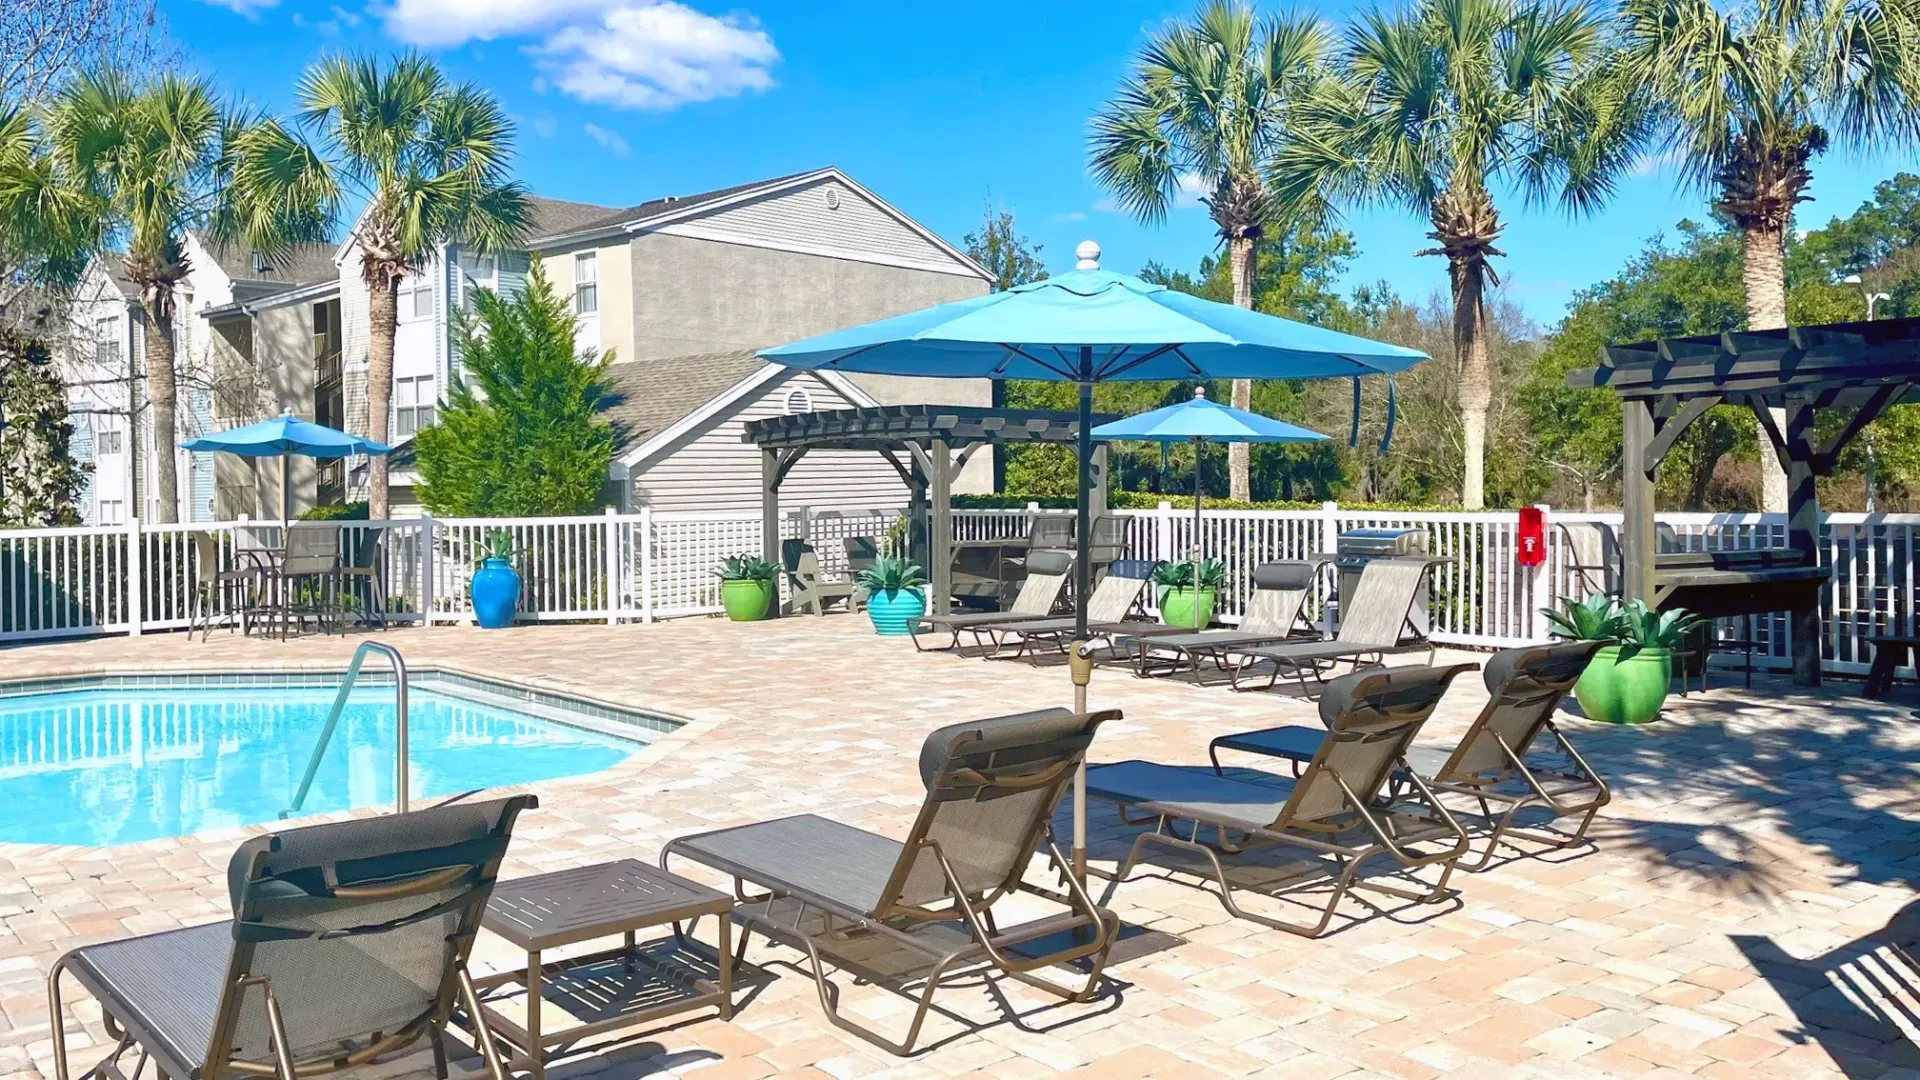 An array of sun loungers, poolside tables, and comfortable Adirondack seating under charming pergolas, beckoning you to unwind.